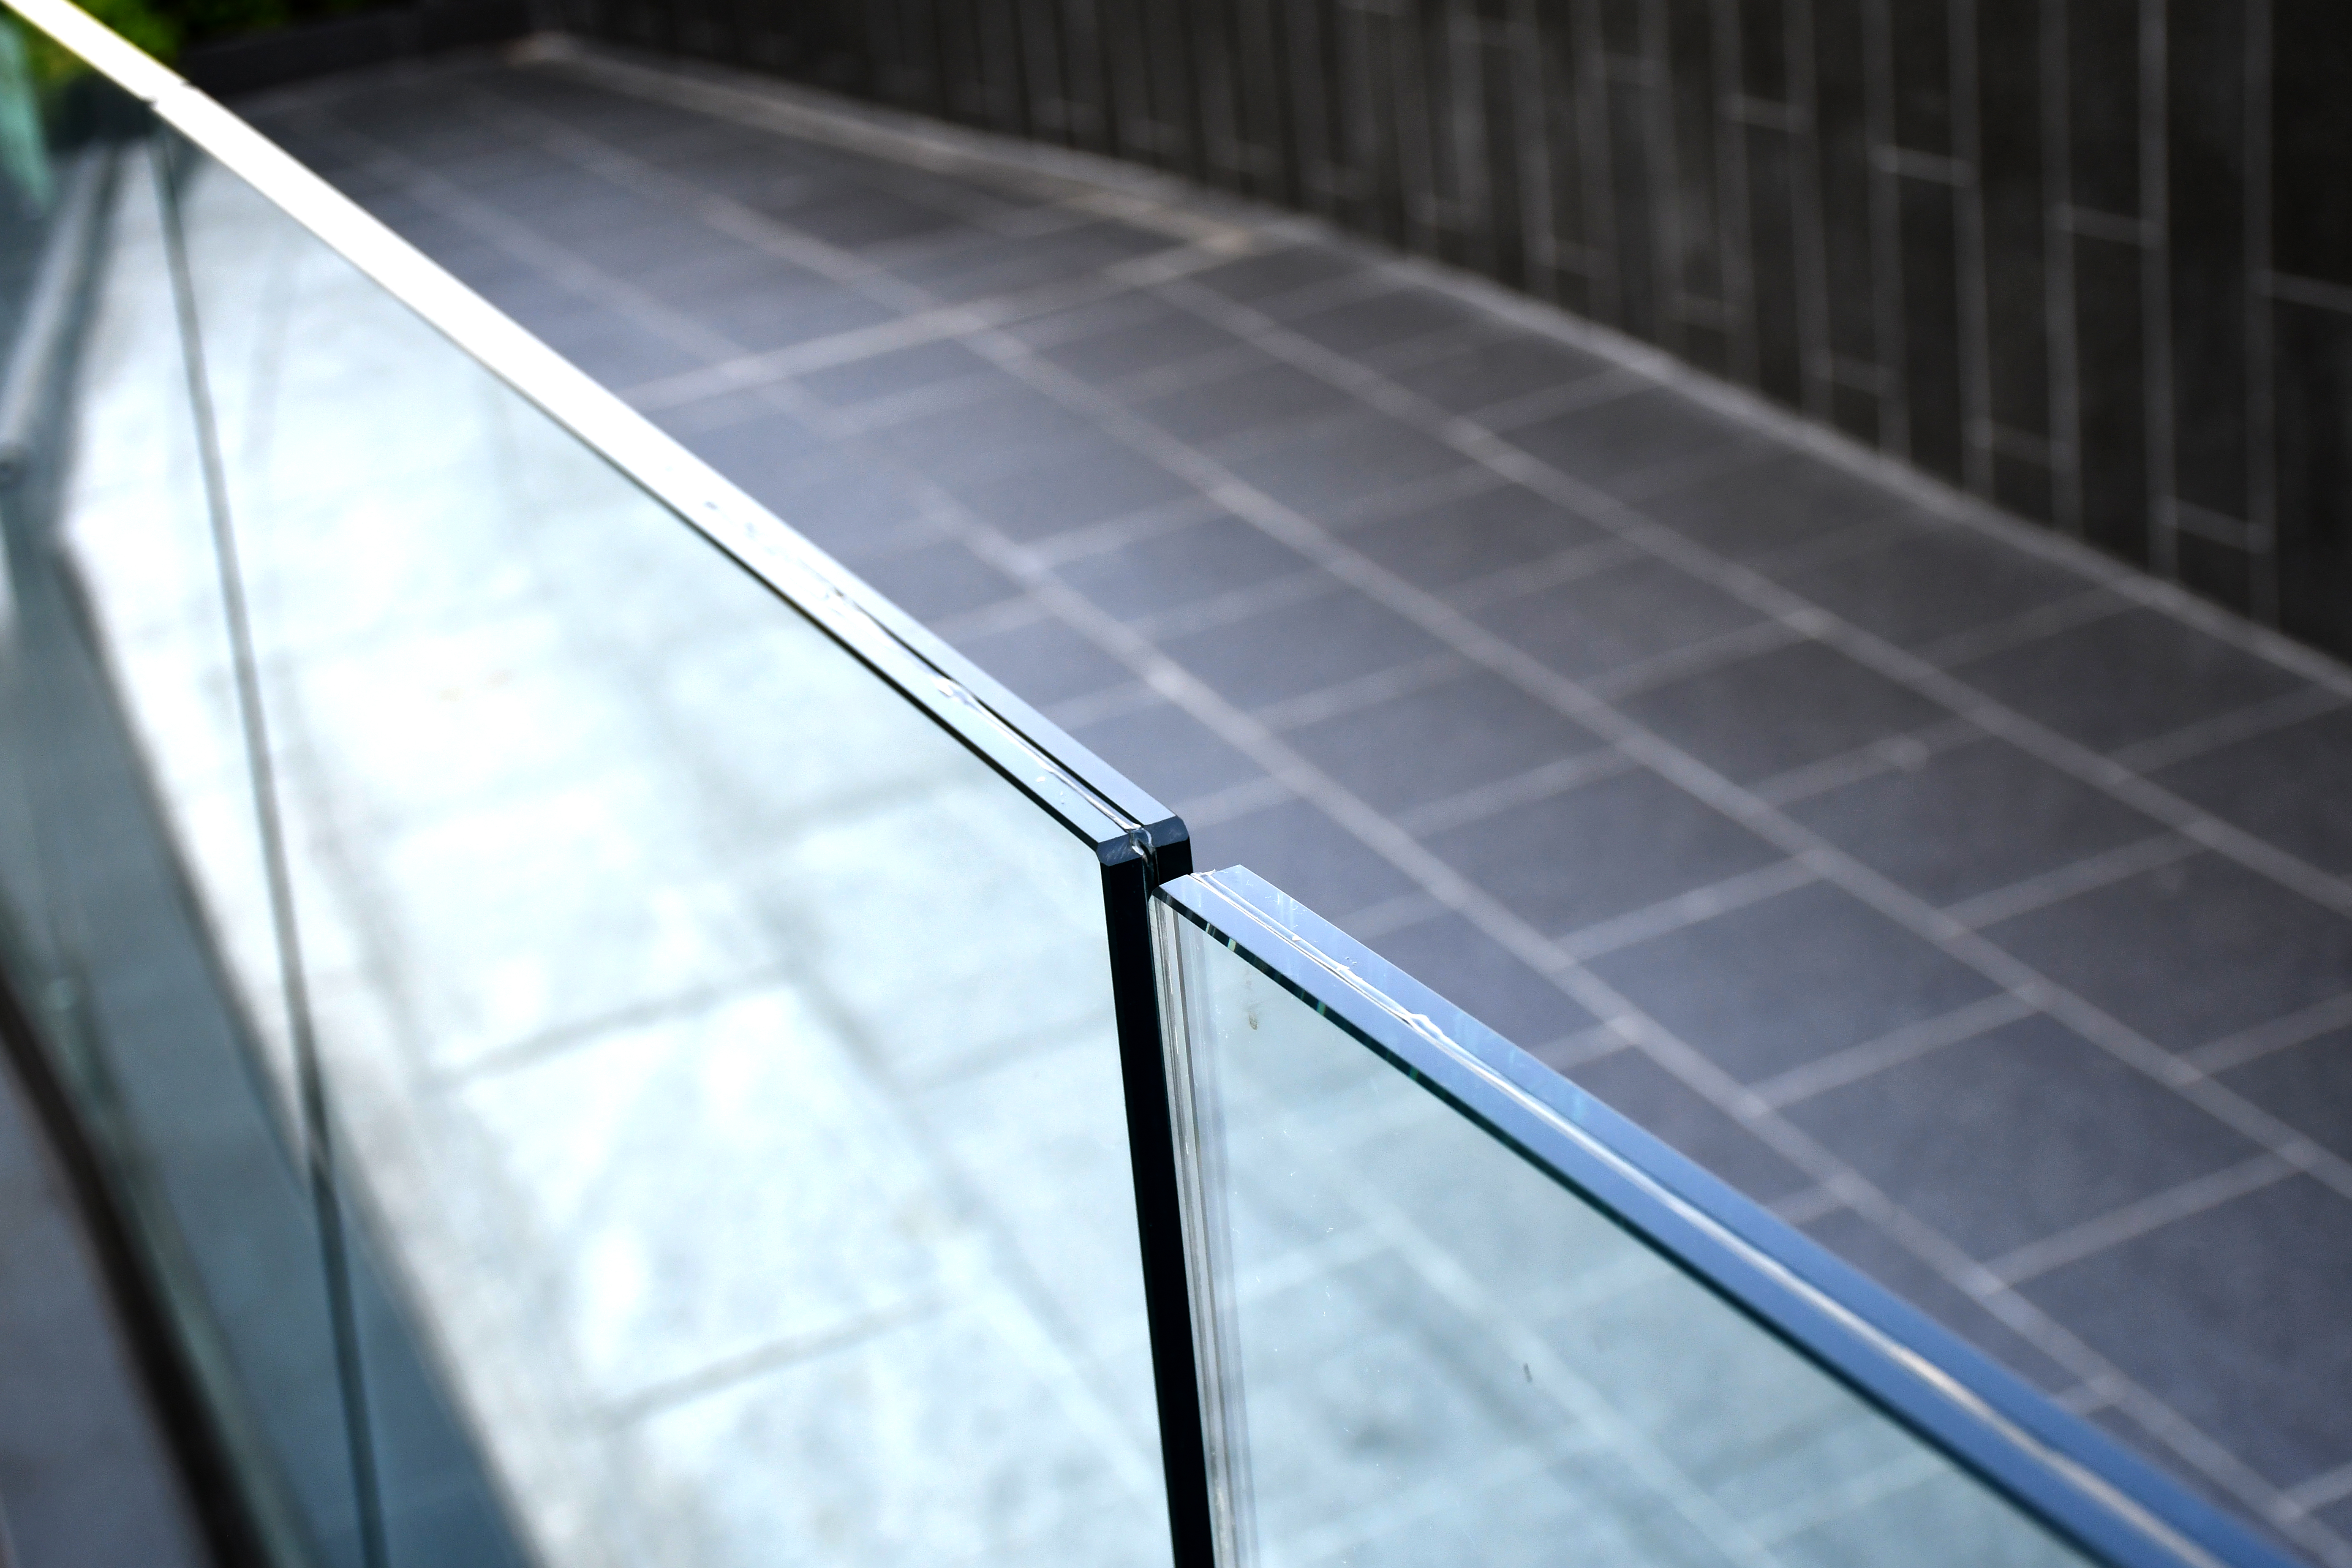 Your Laminated Glass Order: What to Tell Your Supplier